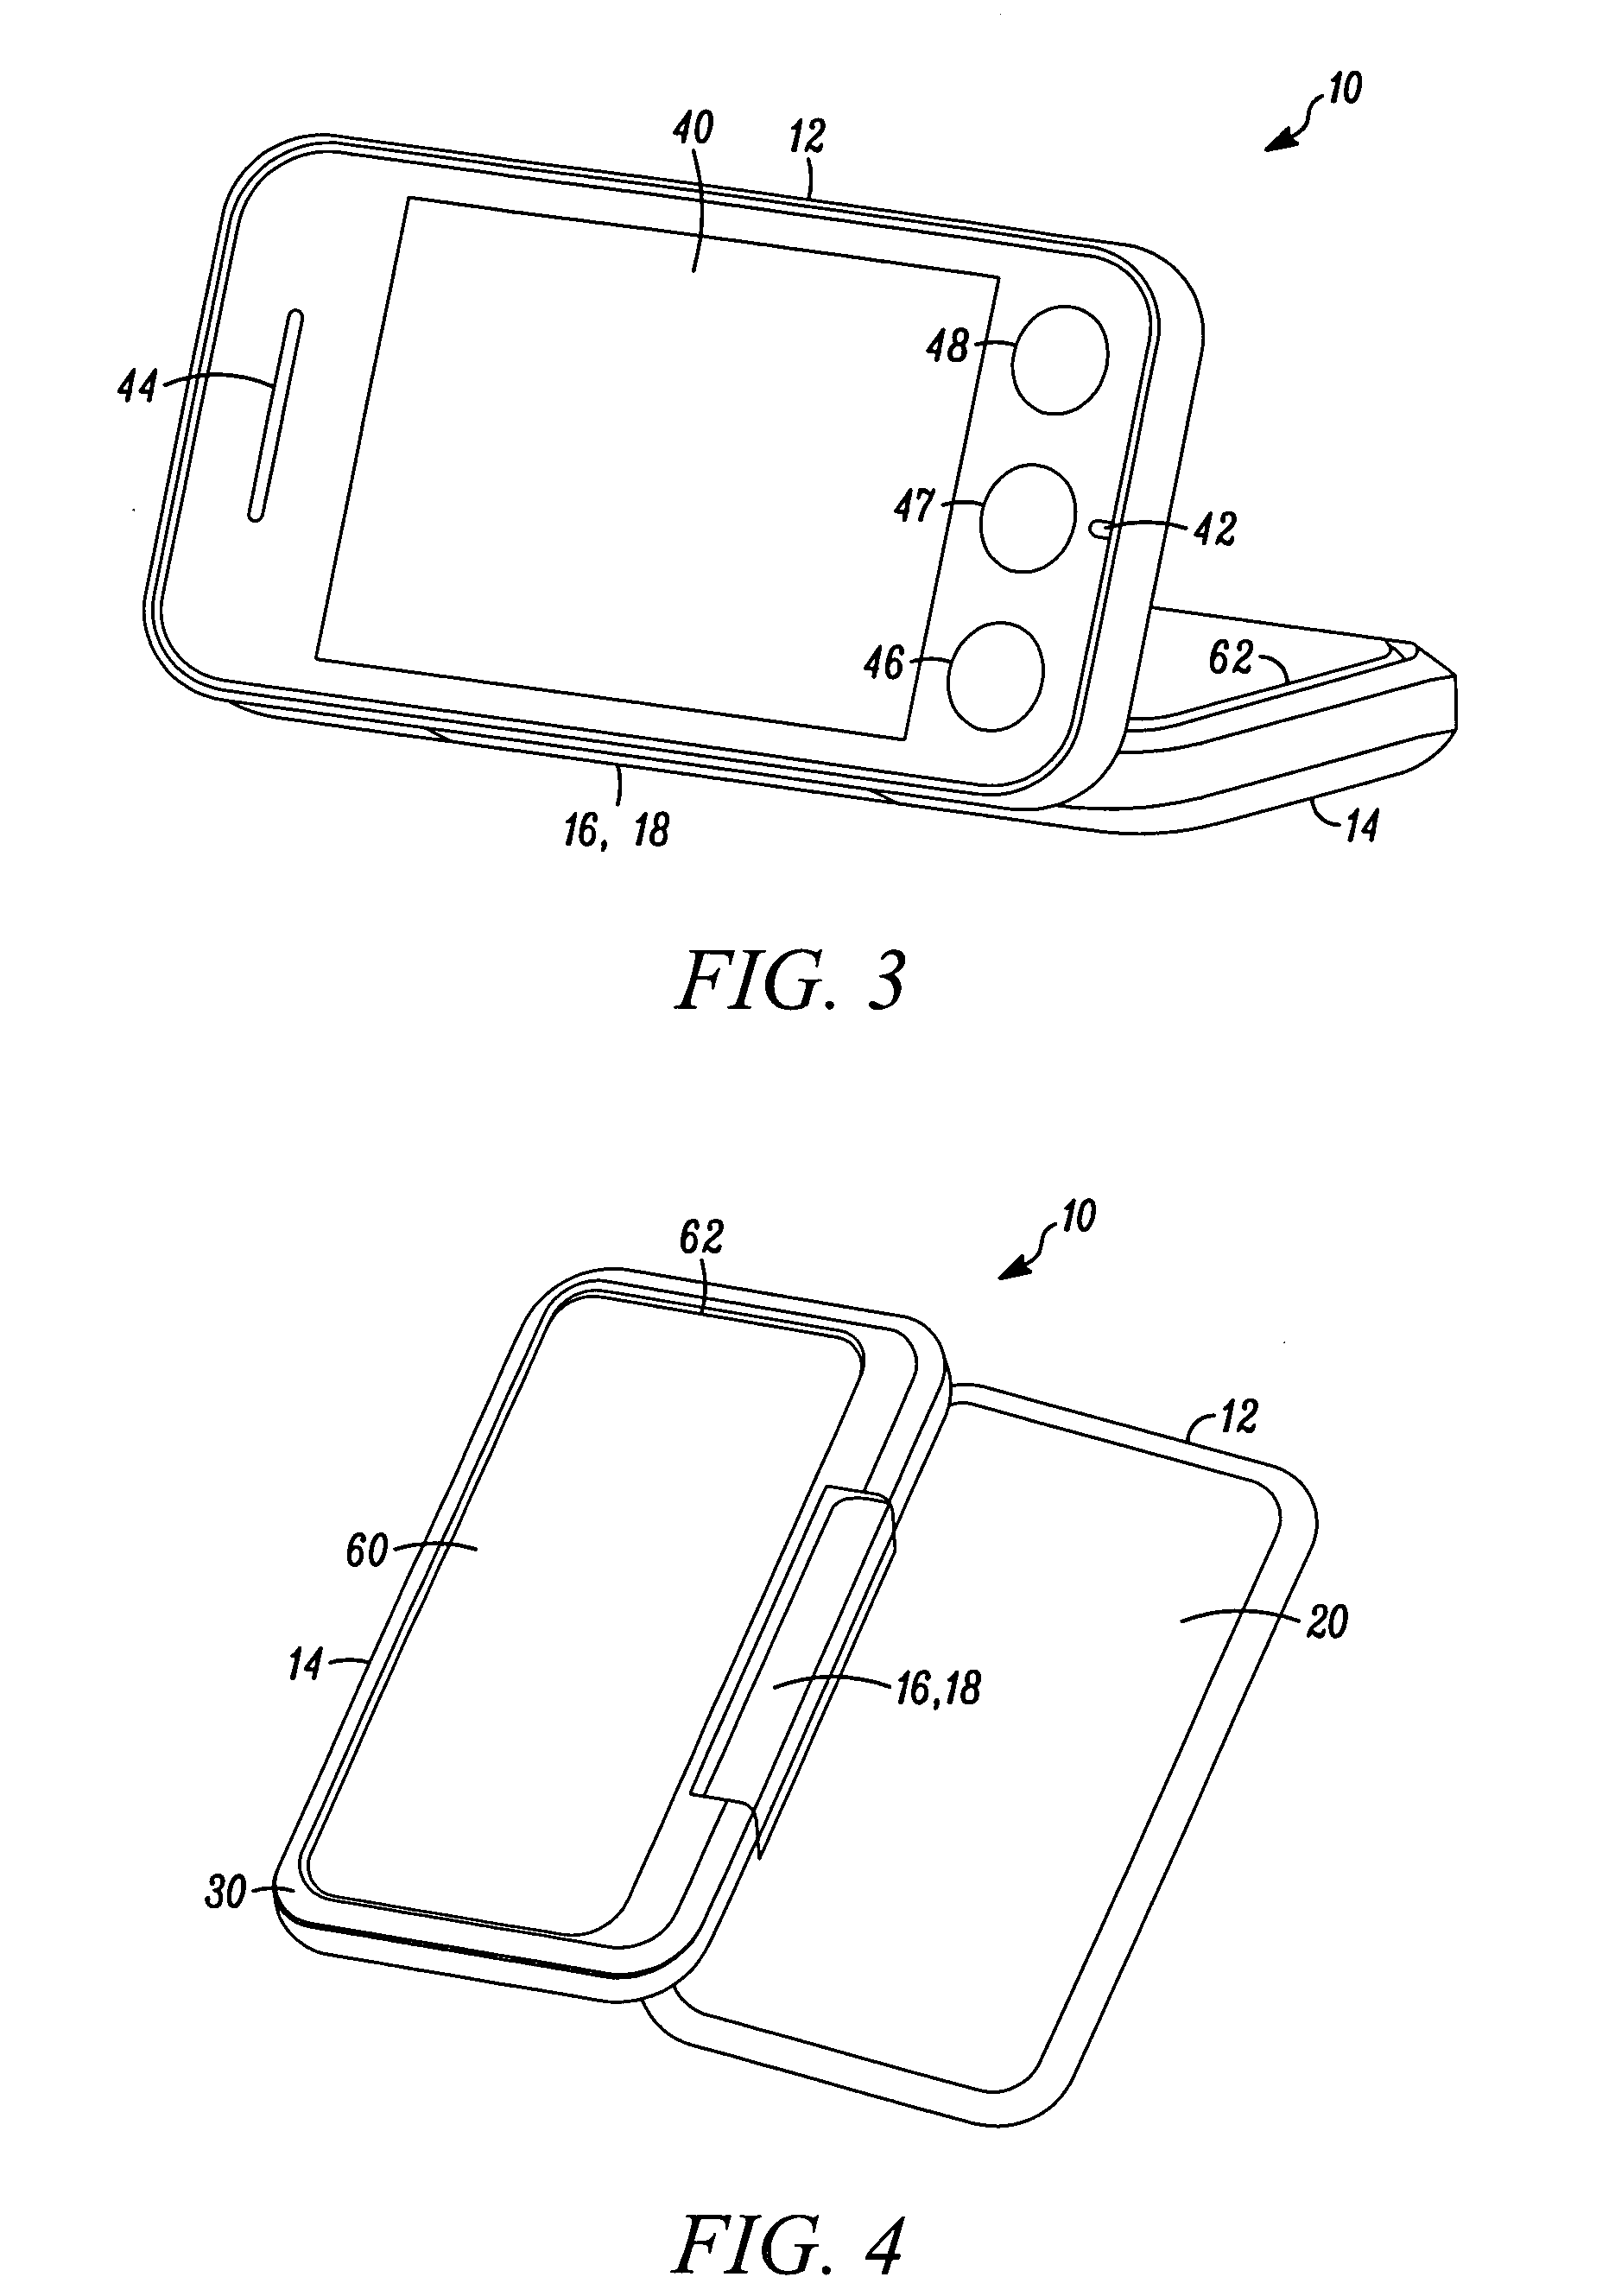 Electronic device having a clamshell configuration